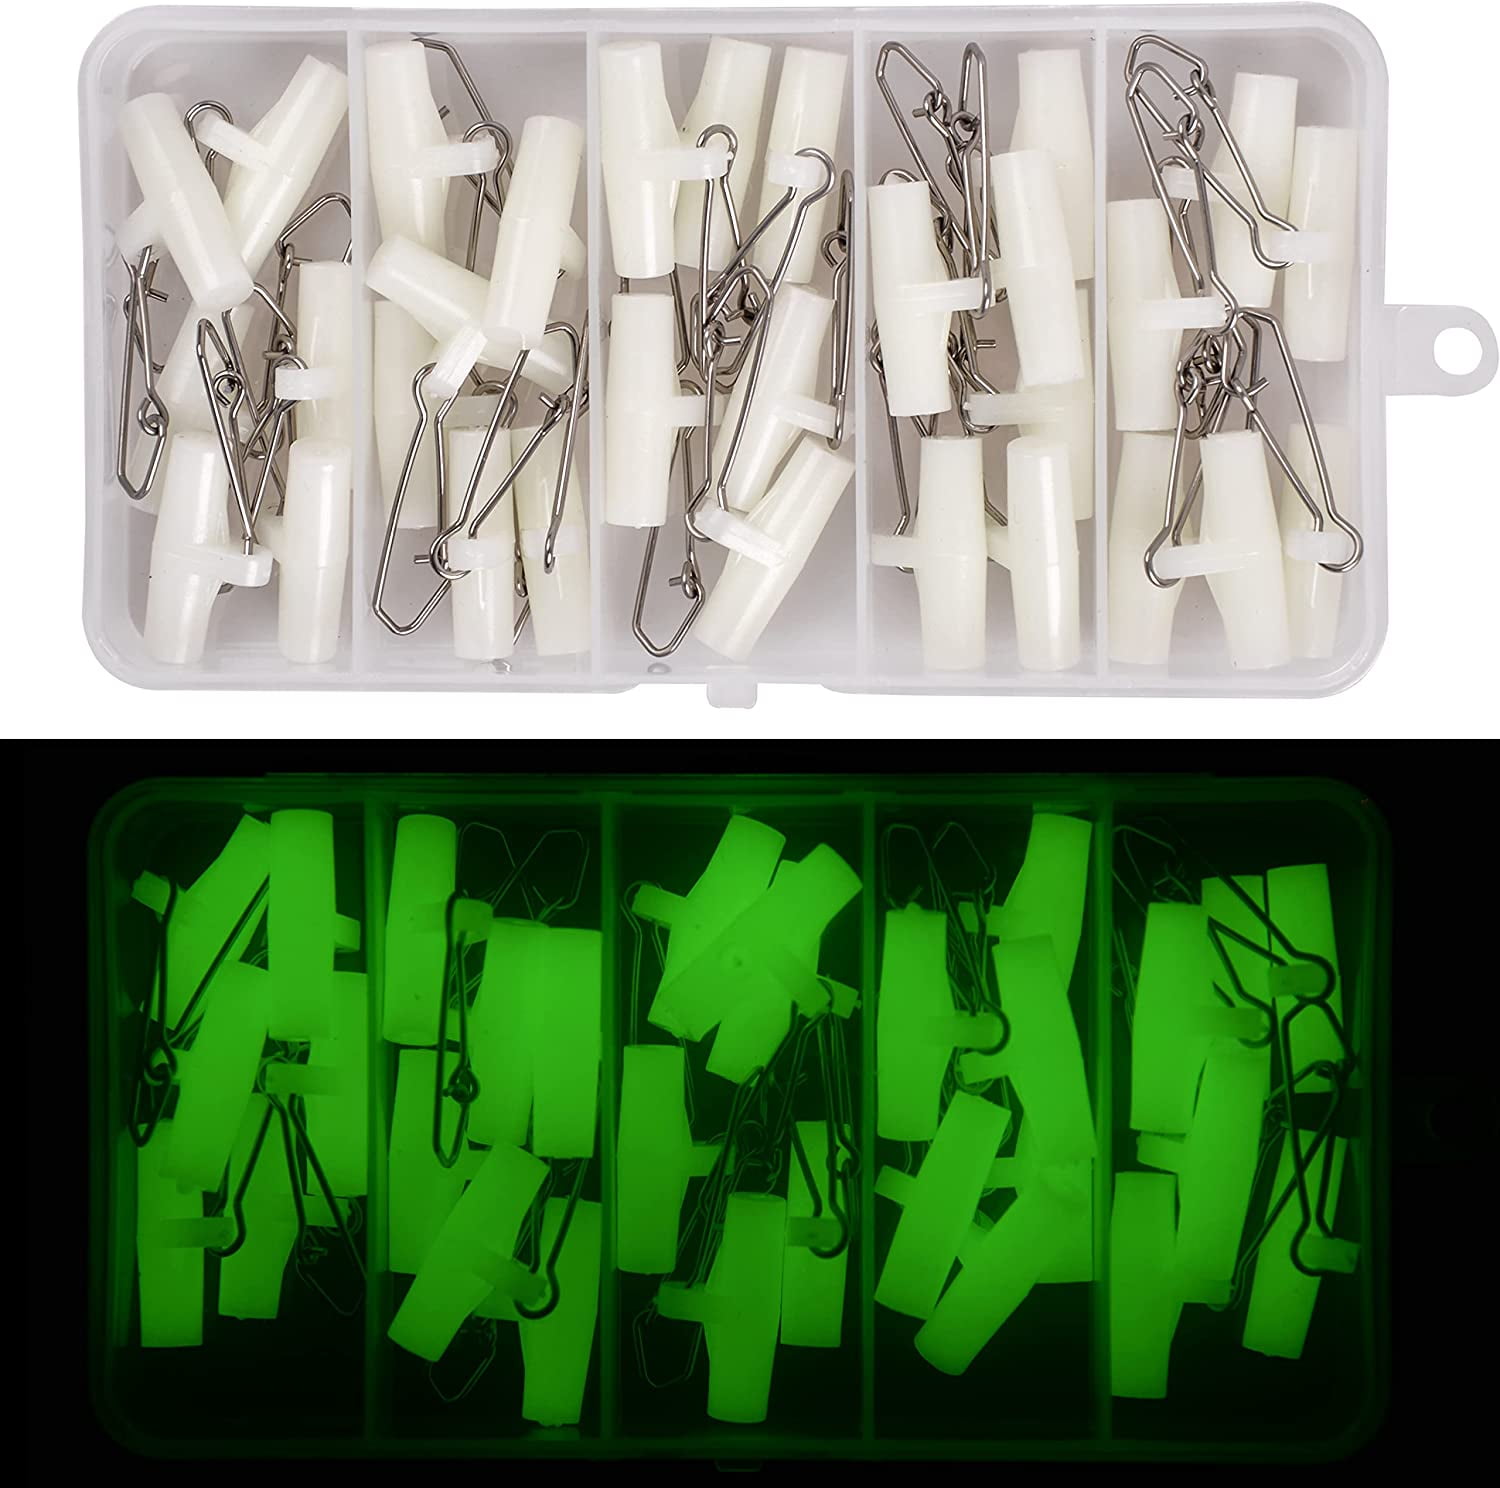 25/30Pcs Luminous Fishing Weight Sinker Sliders with Duo Lock Snap Heavy  Duty Saltwater Fishing Connector Catfish Rig Tackle